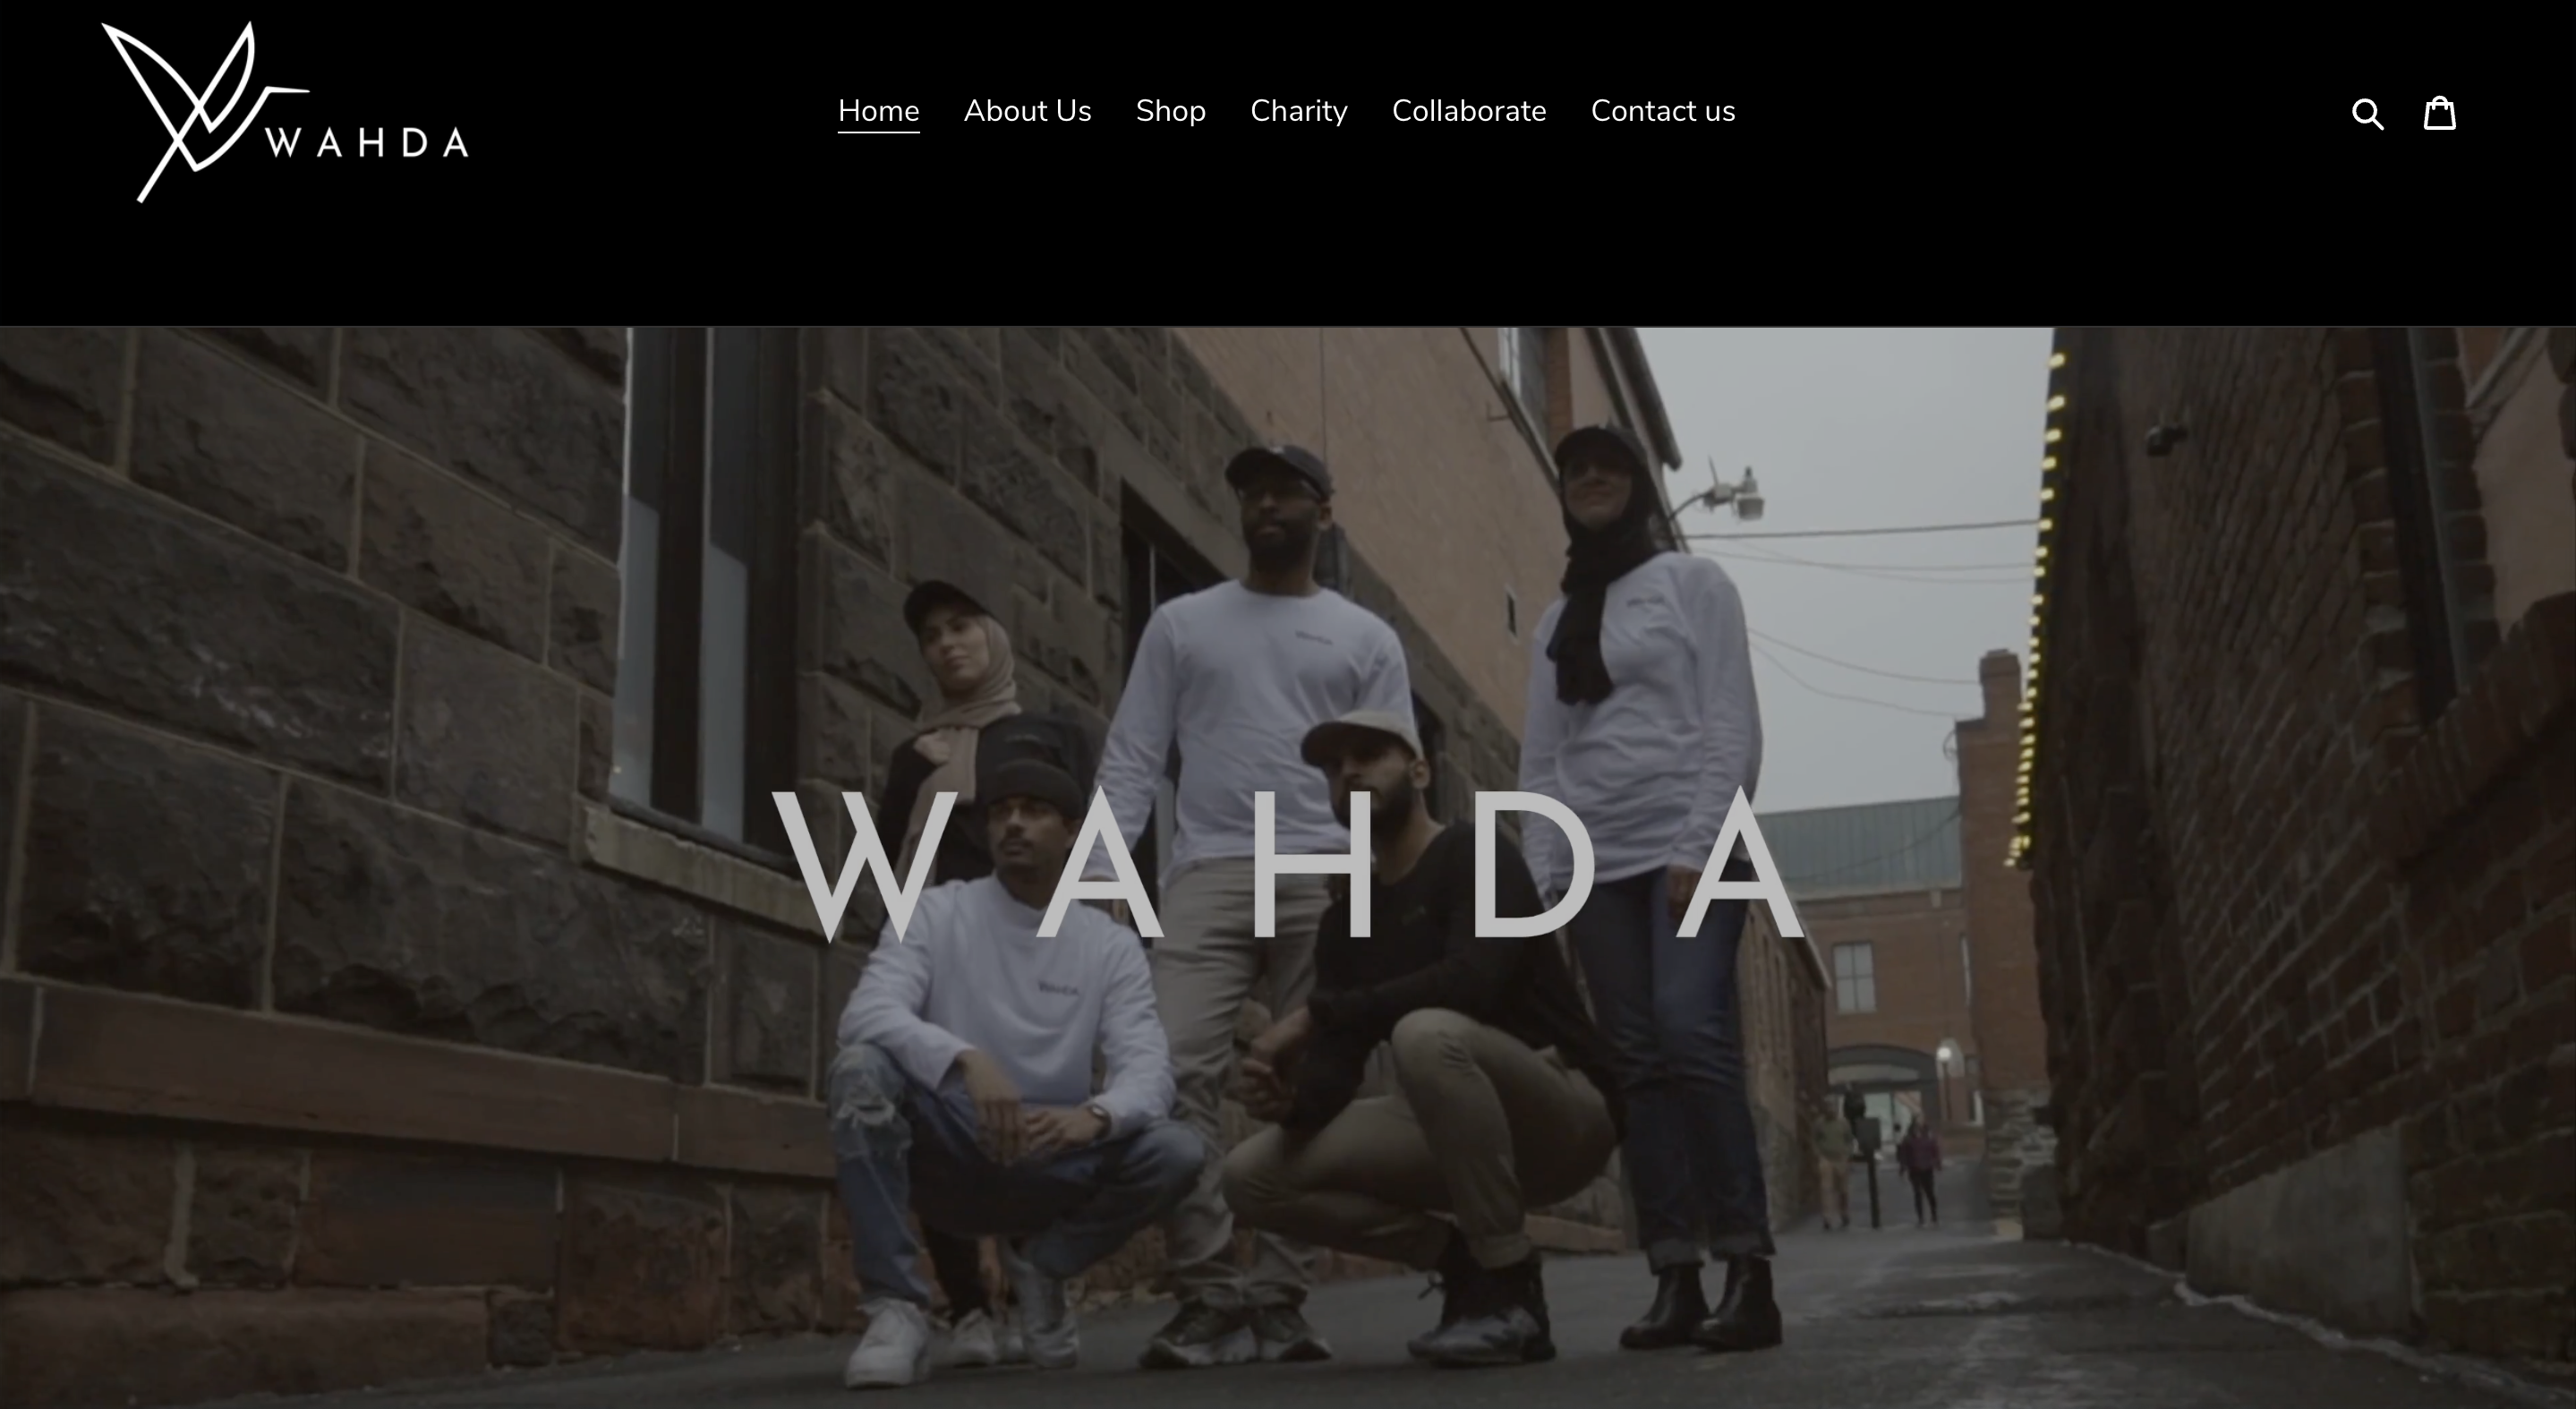 wahda website picture